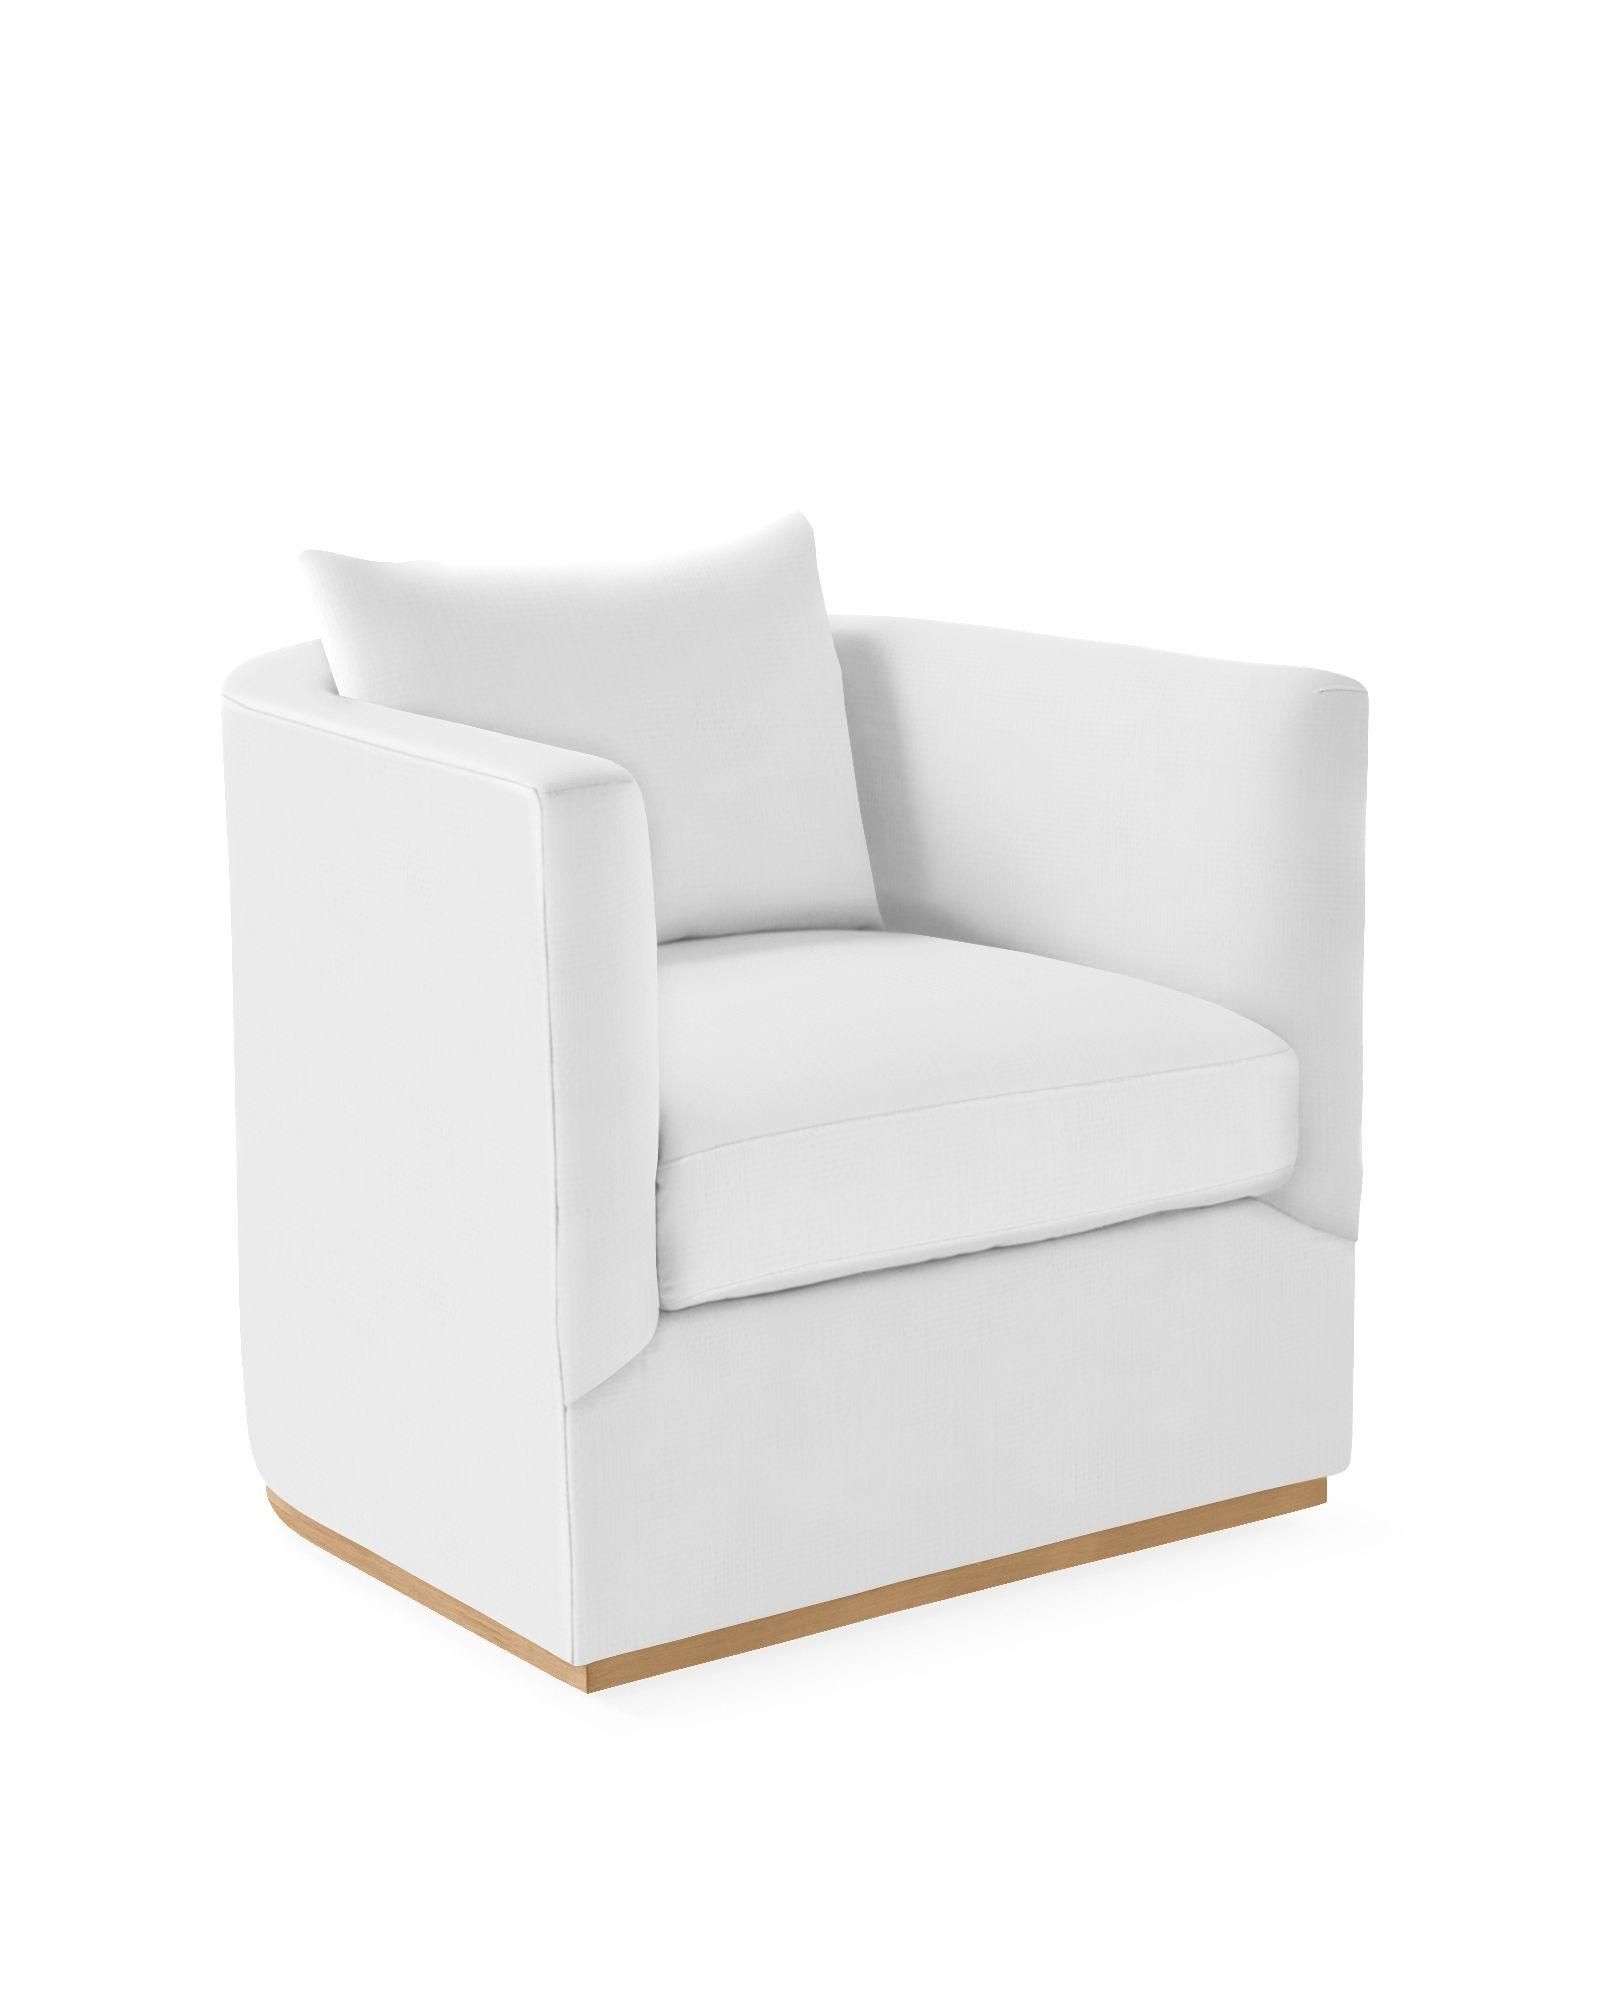 Parkwood Swivel Chair | Serena and Lily